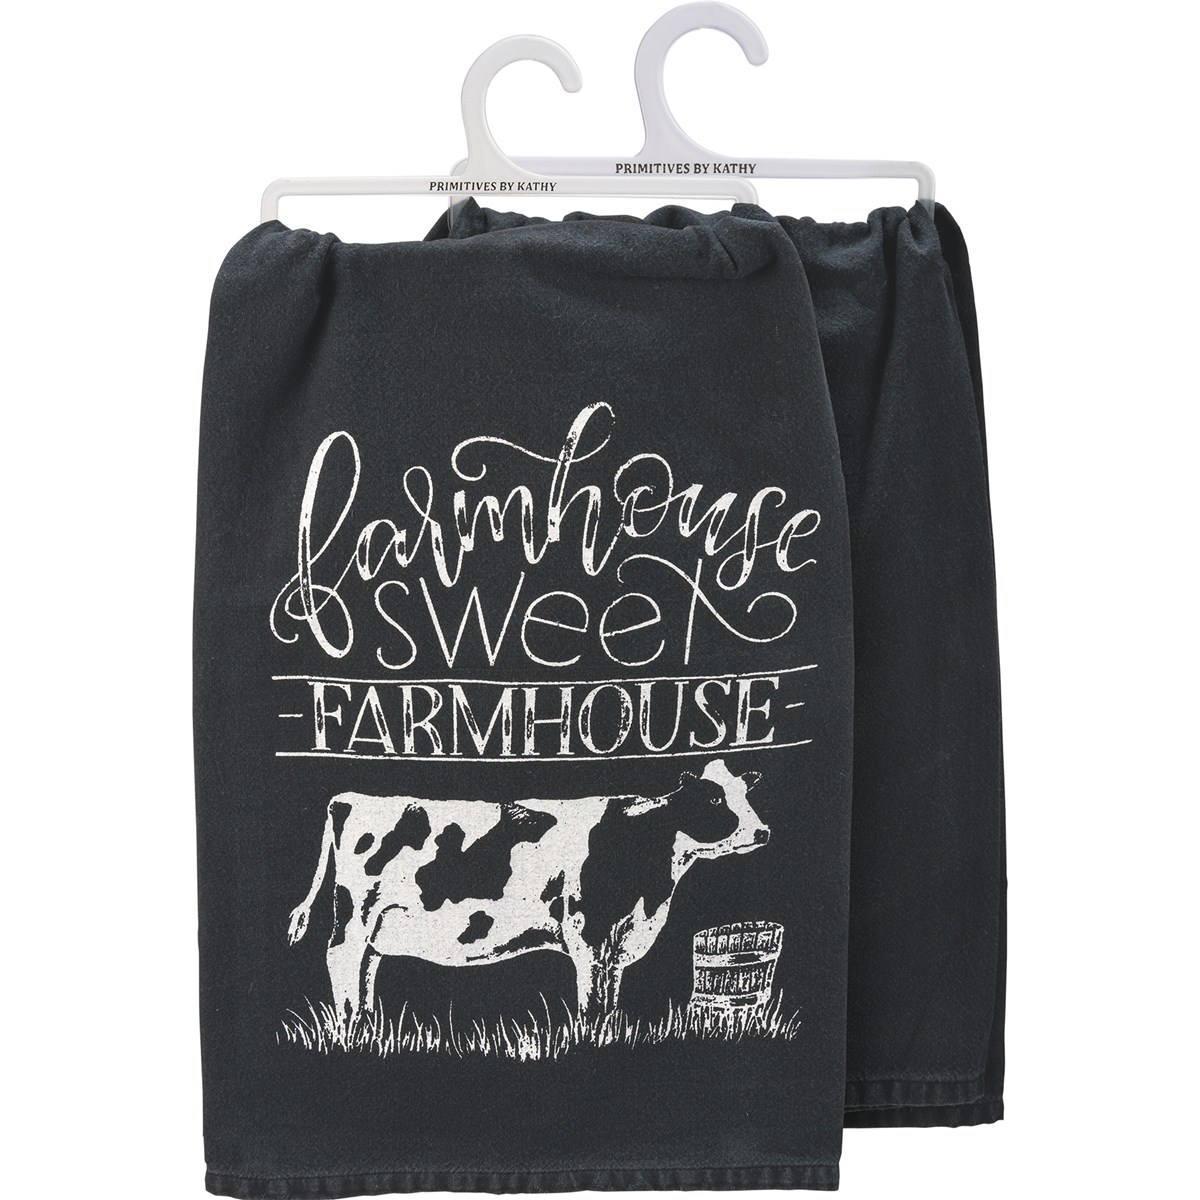  Farmhouse Cow Dish Towel! Featuring a cute cow and bucket drawing in a black and white color scheme,